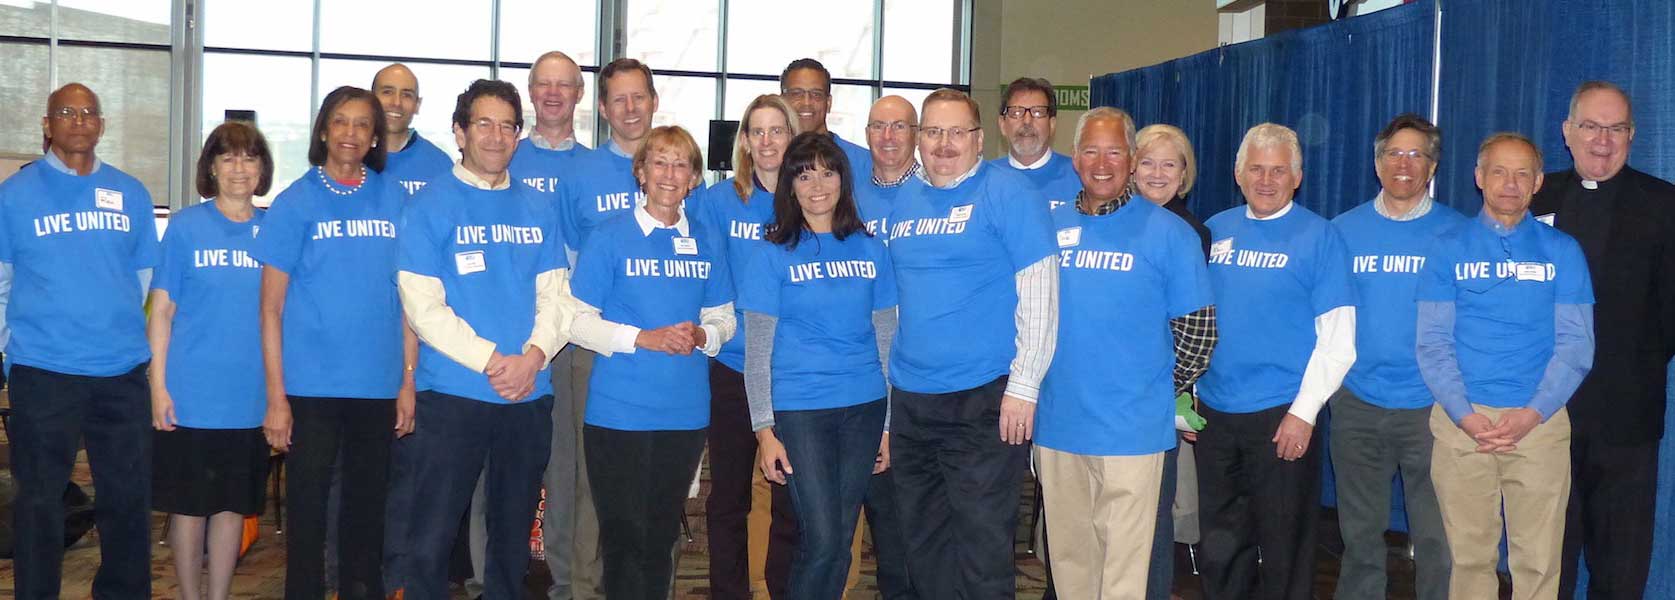 United Way of King County Board of Directors